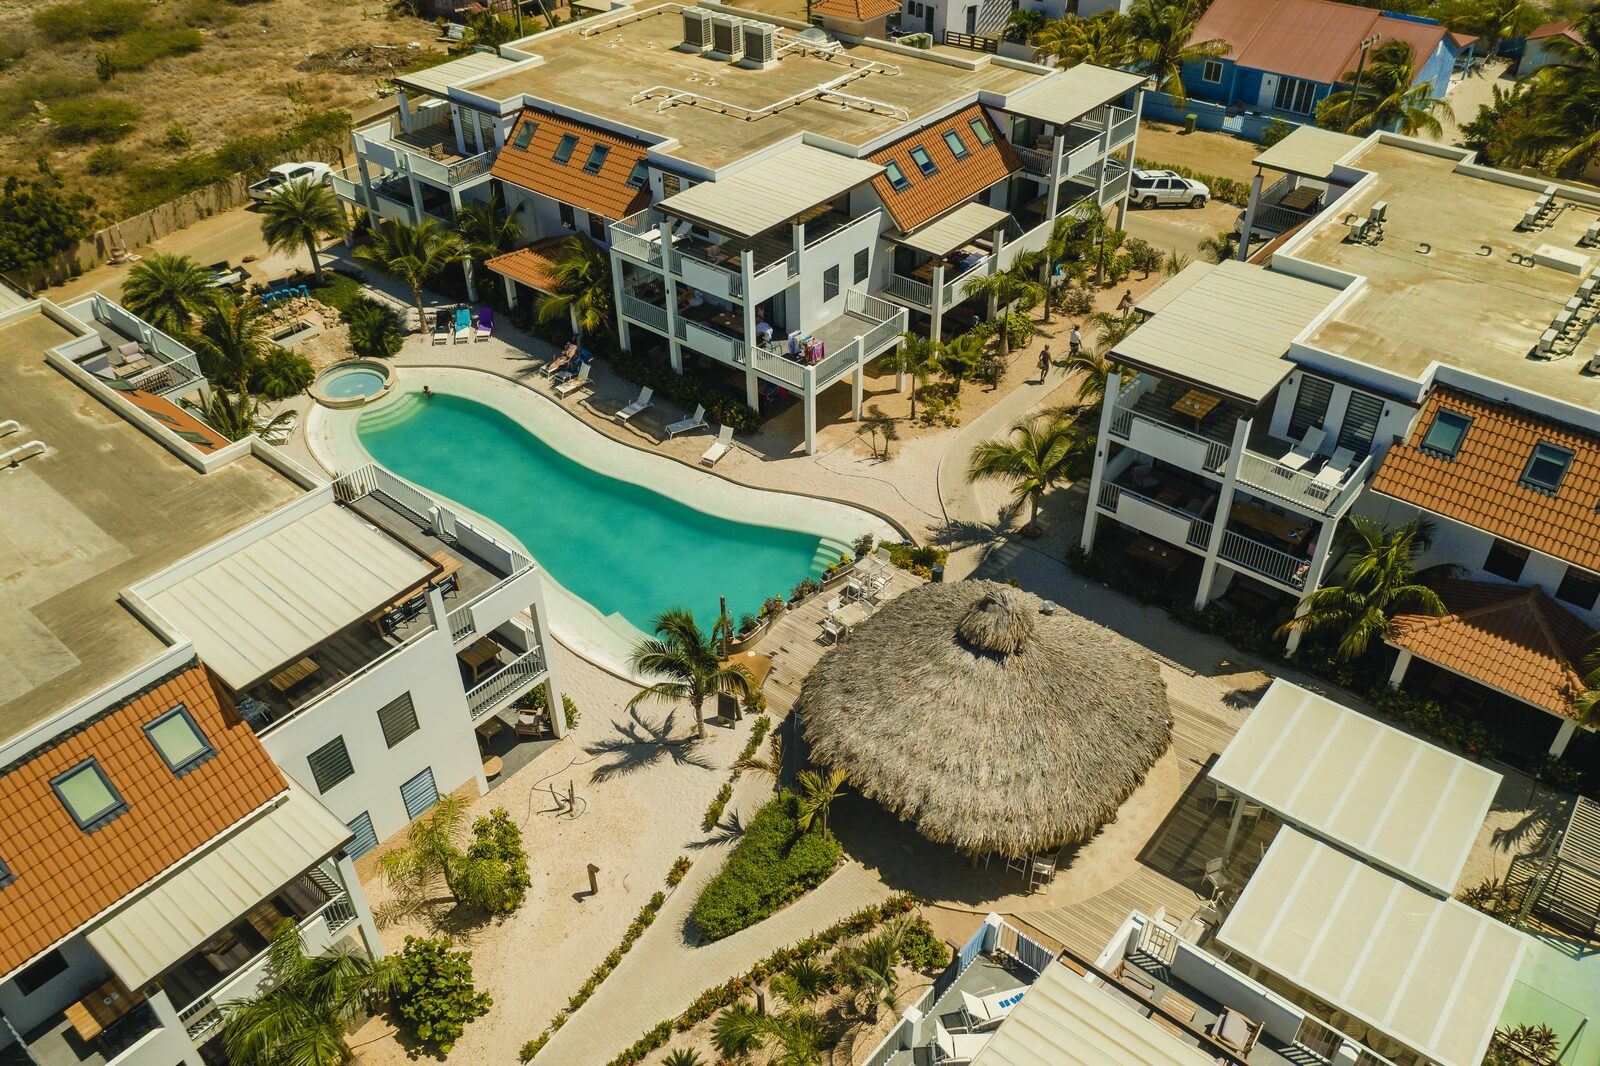 Your stay at Bonaire Resorts